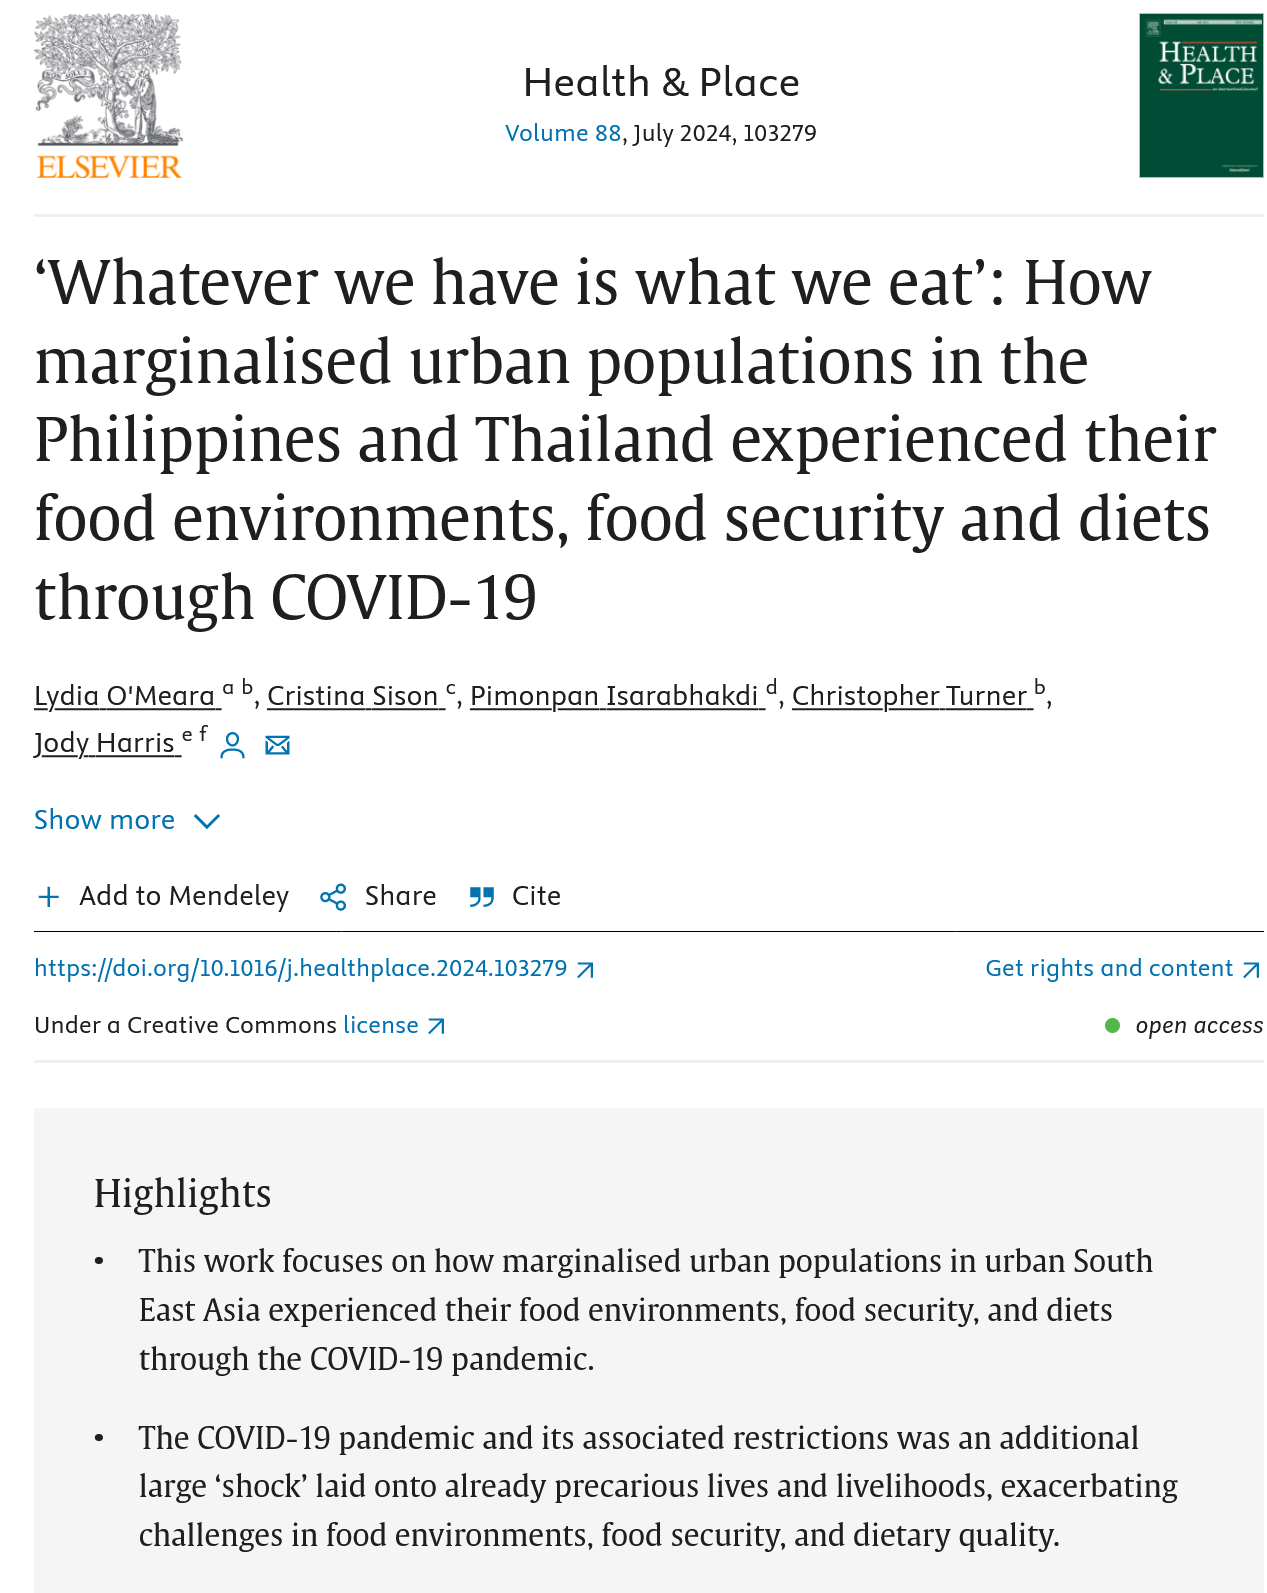 Whatever we have is what we eat’: How marginalised urban populations in  the Philippines and Thailand experienced their food environments, food  security and diets through COVID-19